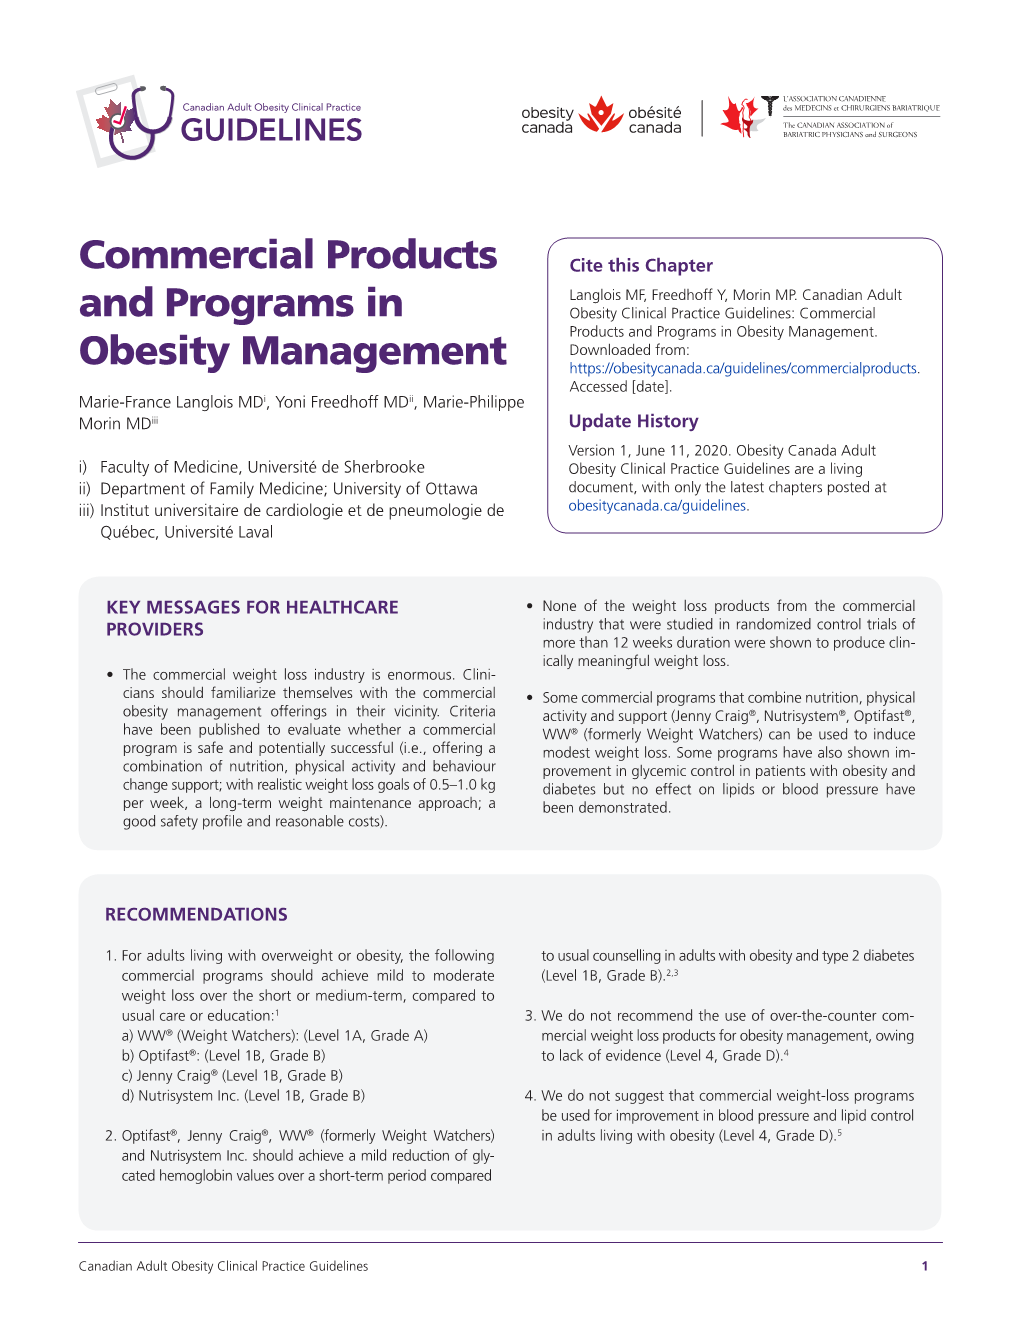 Commercial Products and Programs in Obesity Management